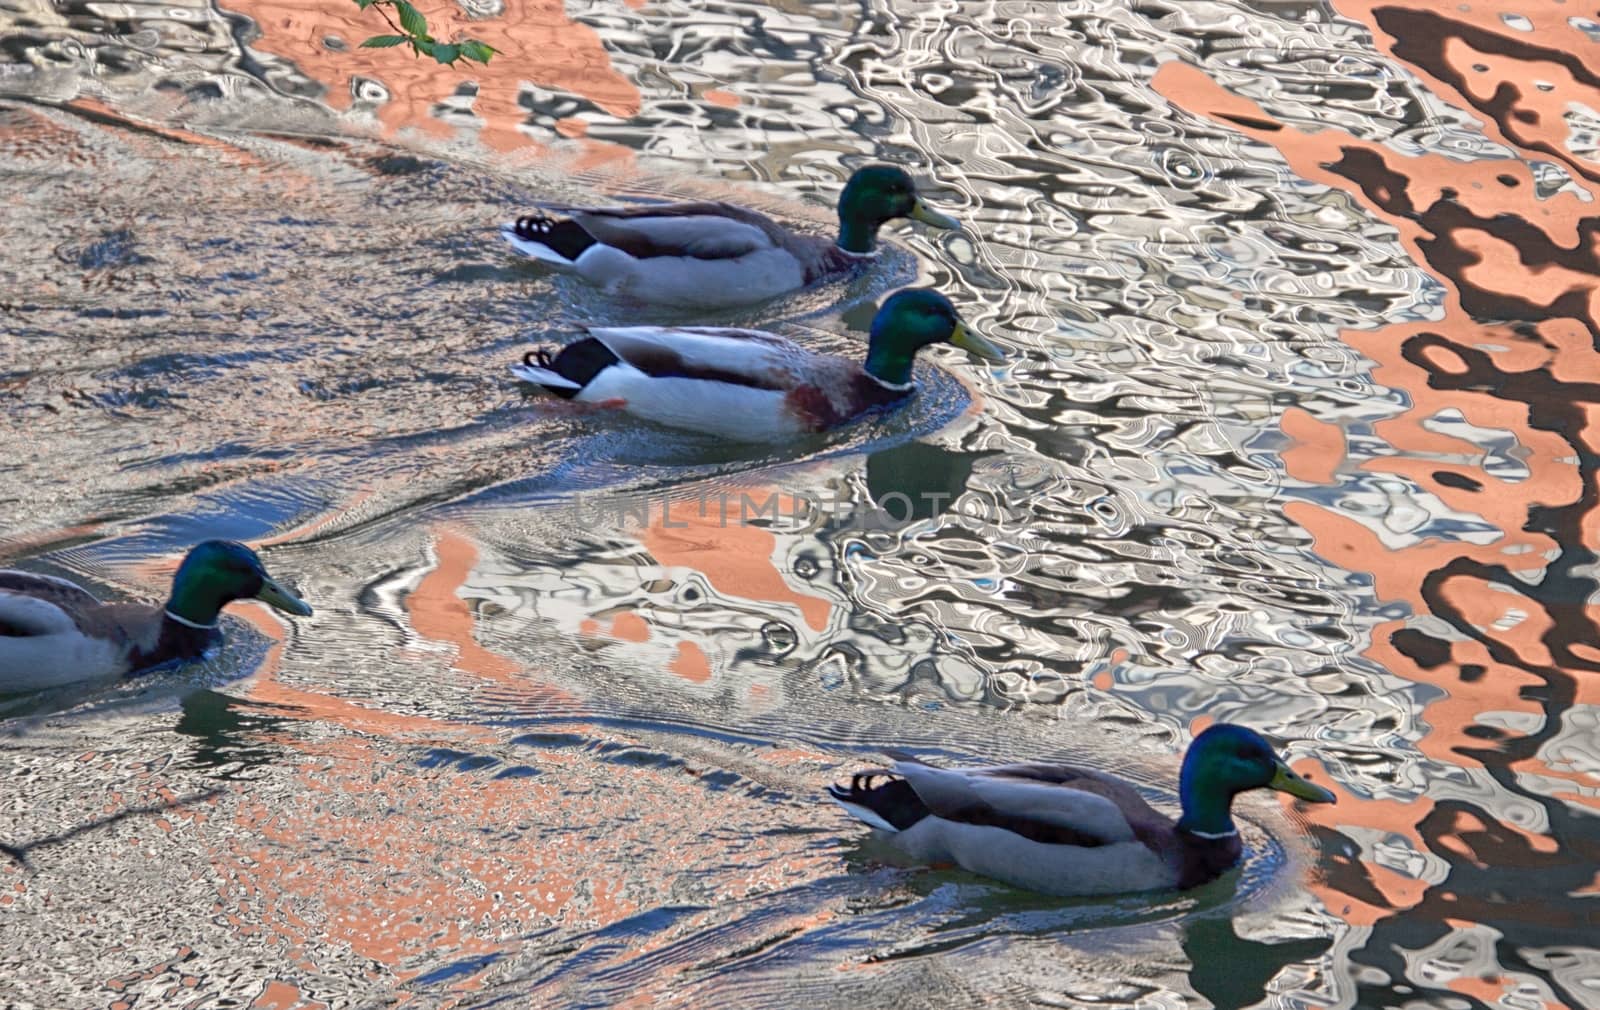 Ducks in a canal on a sunny day